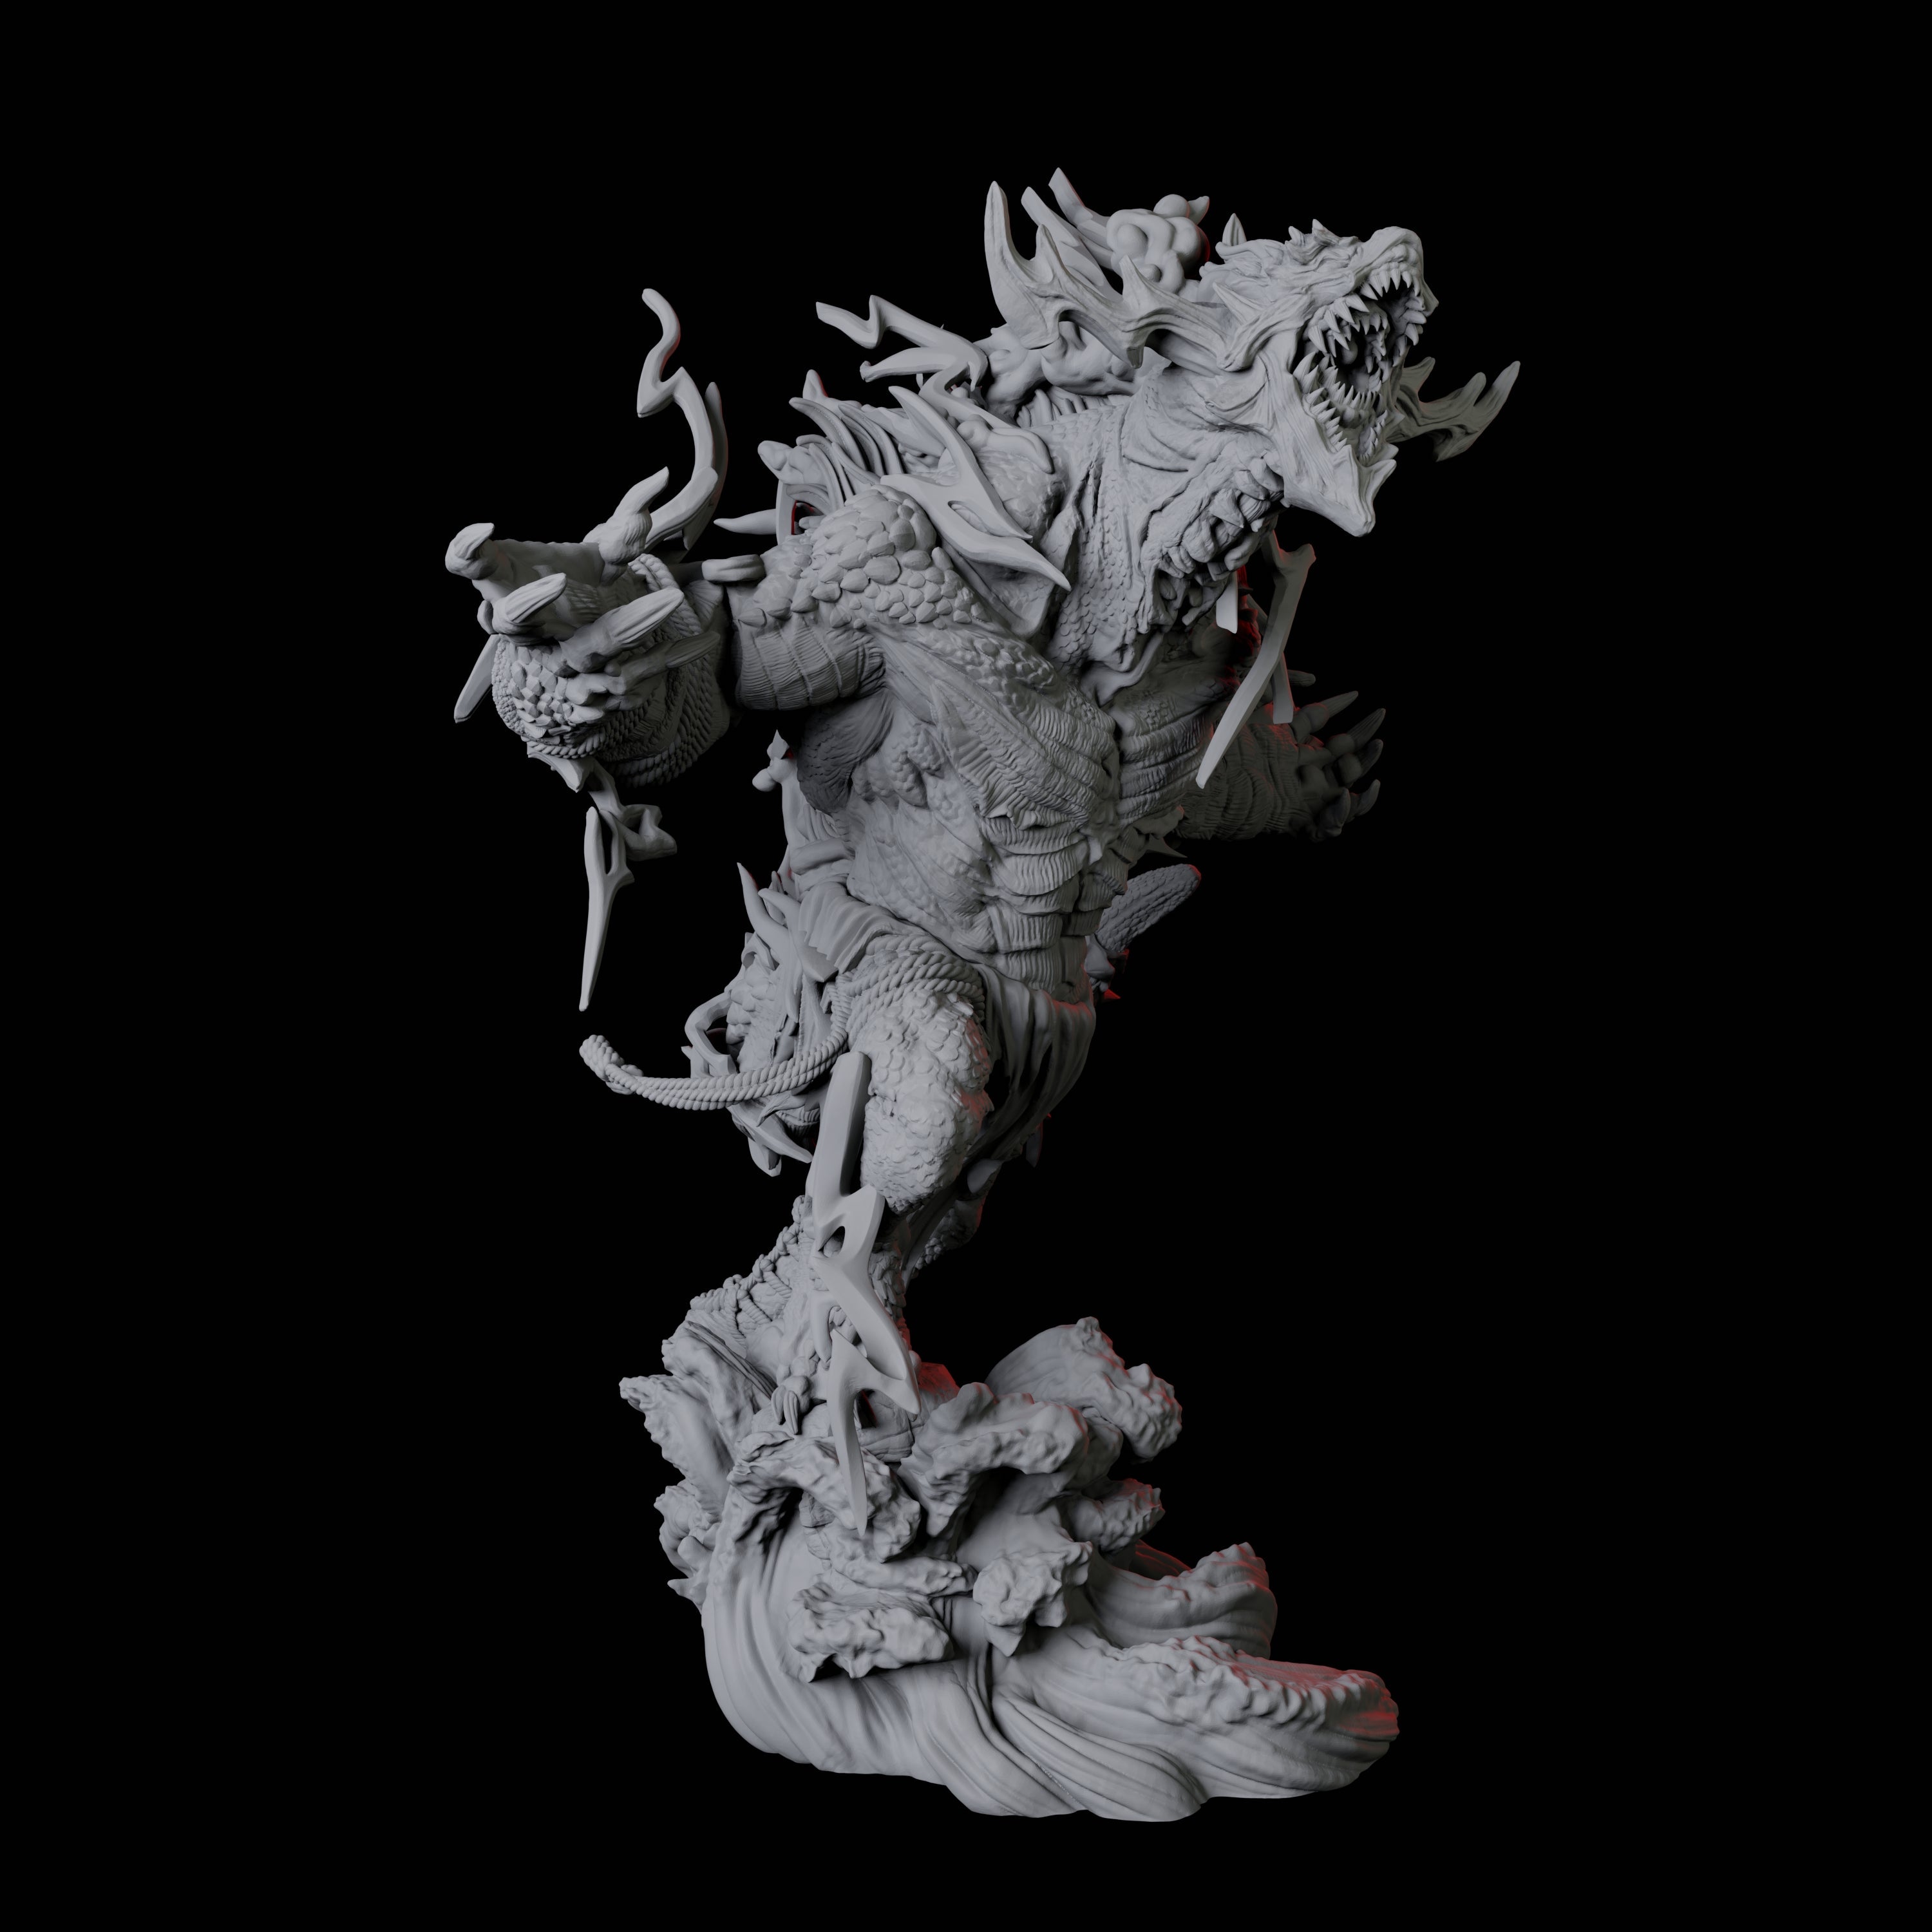 Storm Troll B Miniature for Dungeons and Dragons, Pathfinder or other TTRPGs